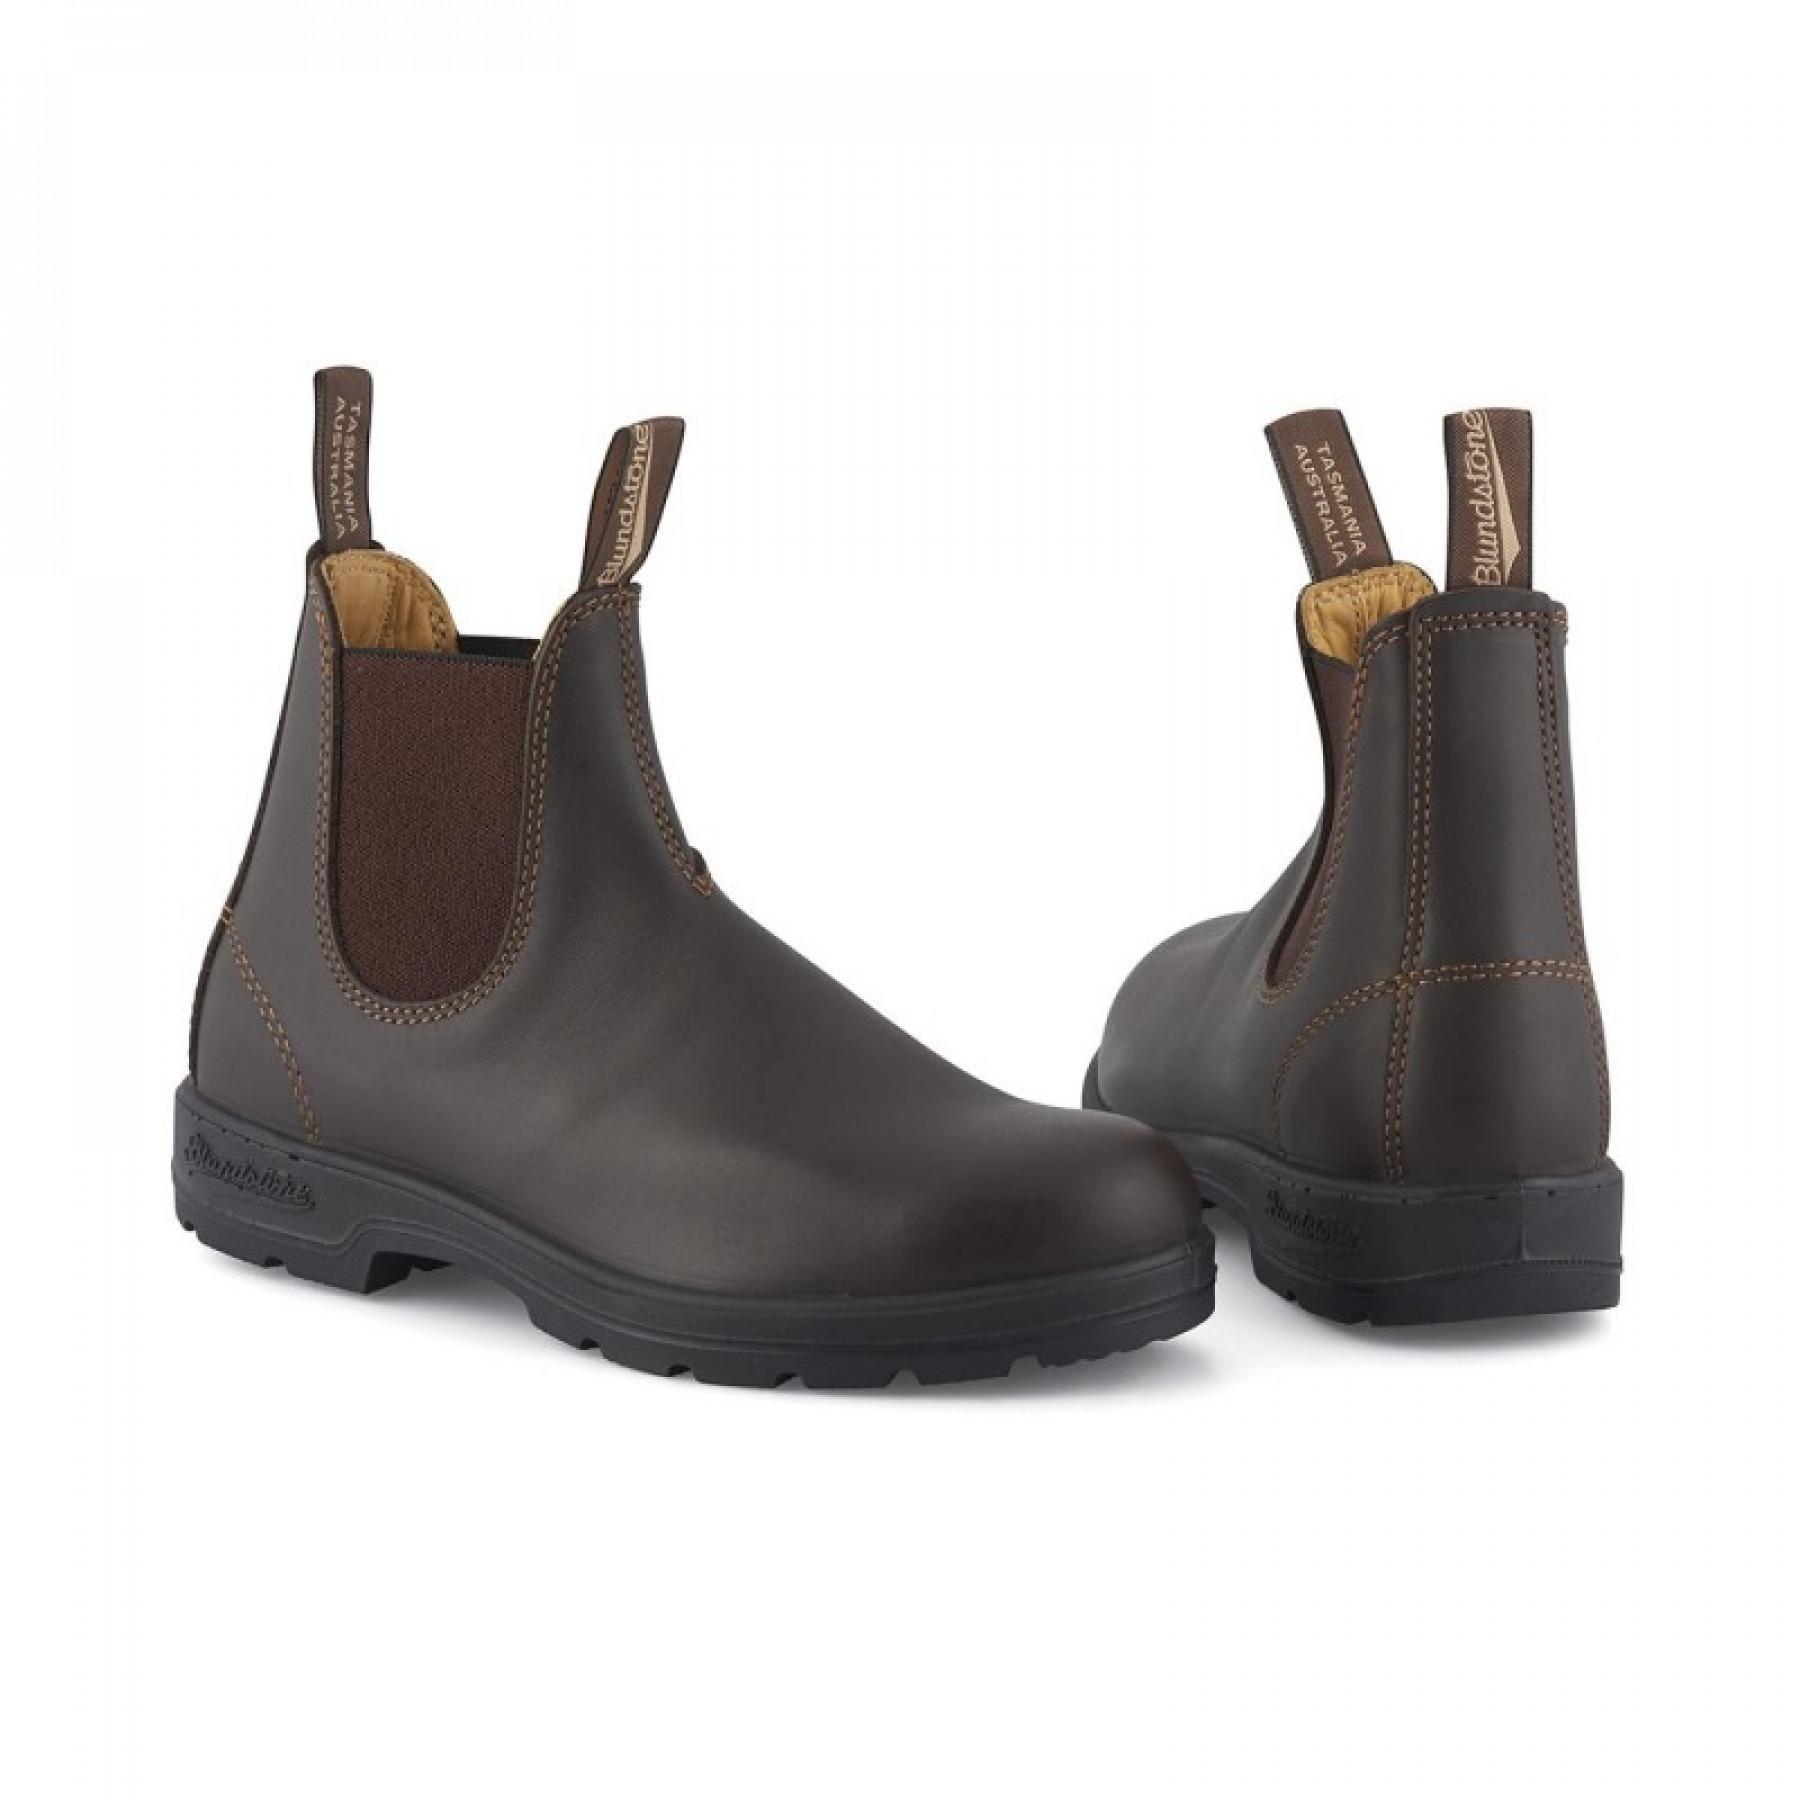 Shoes Blundstone Classic Chelsea Boots 550 Walnut Brown